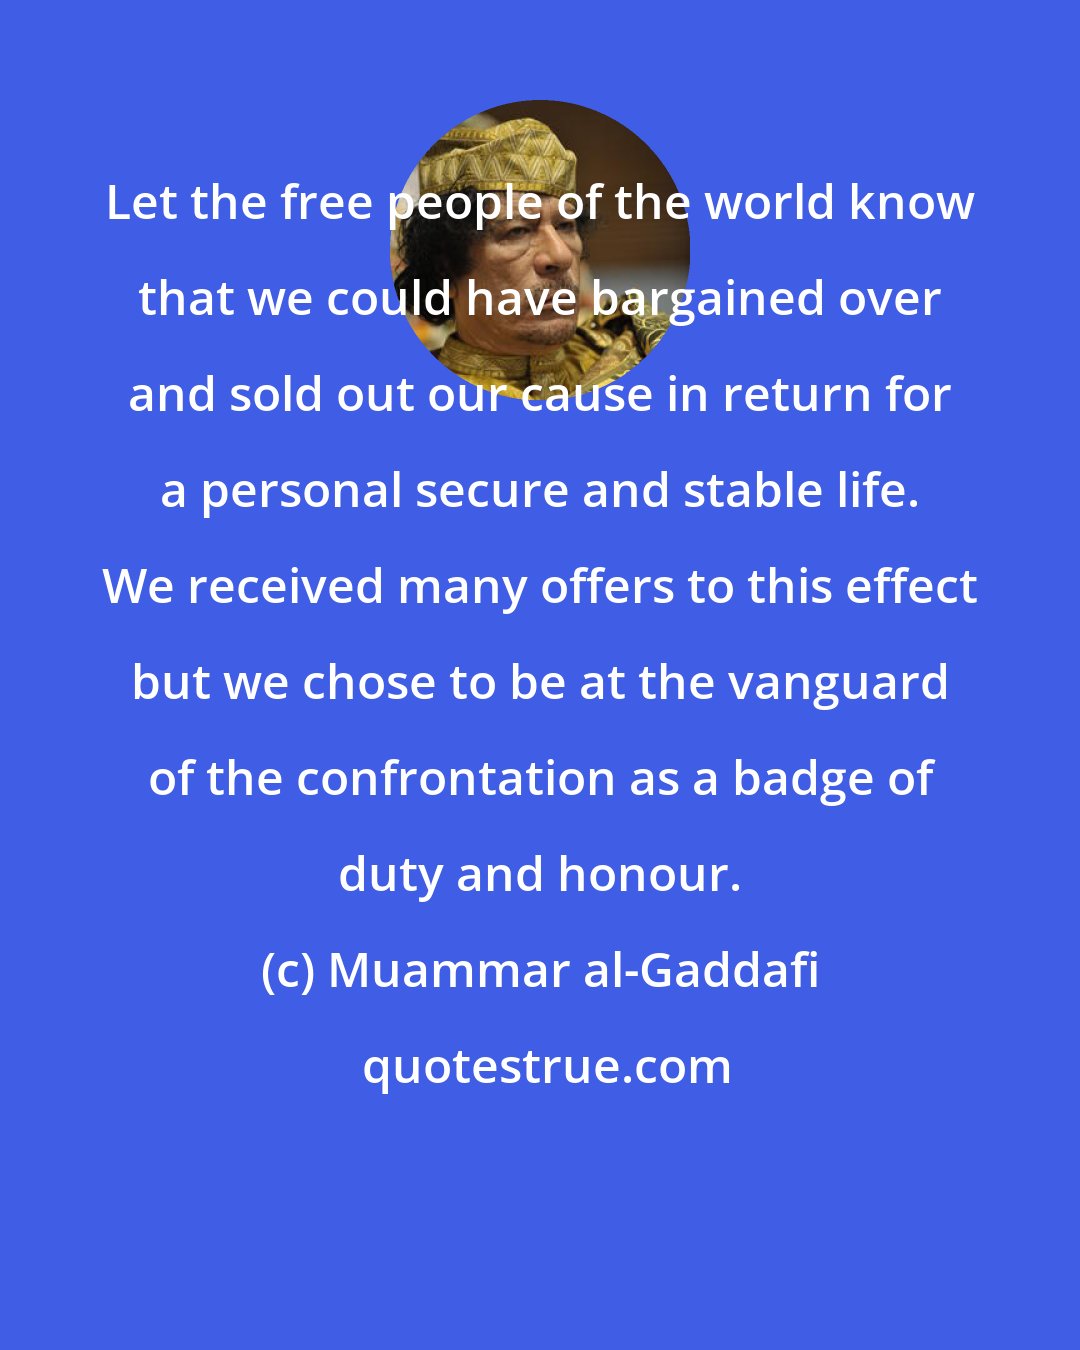 Muammar al-Gaddafi: Let the free people of the world know that we could have bargained over and sold out our cause in return for a personal secure and stable life. We received many offers to this effect but we chose to be at the vanguard of the confrontation as a badge of duty and honour.